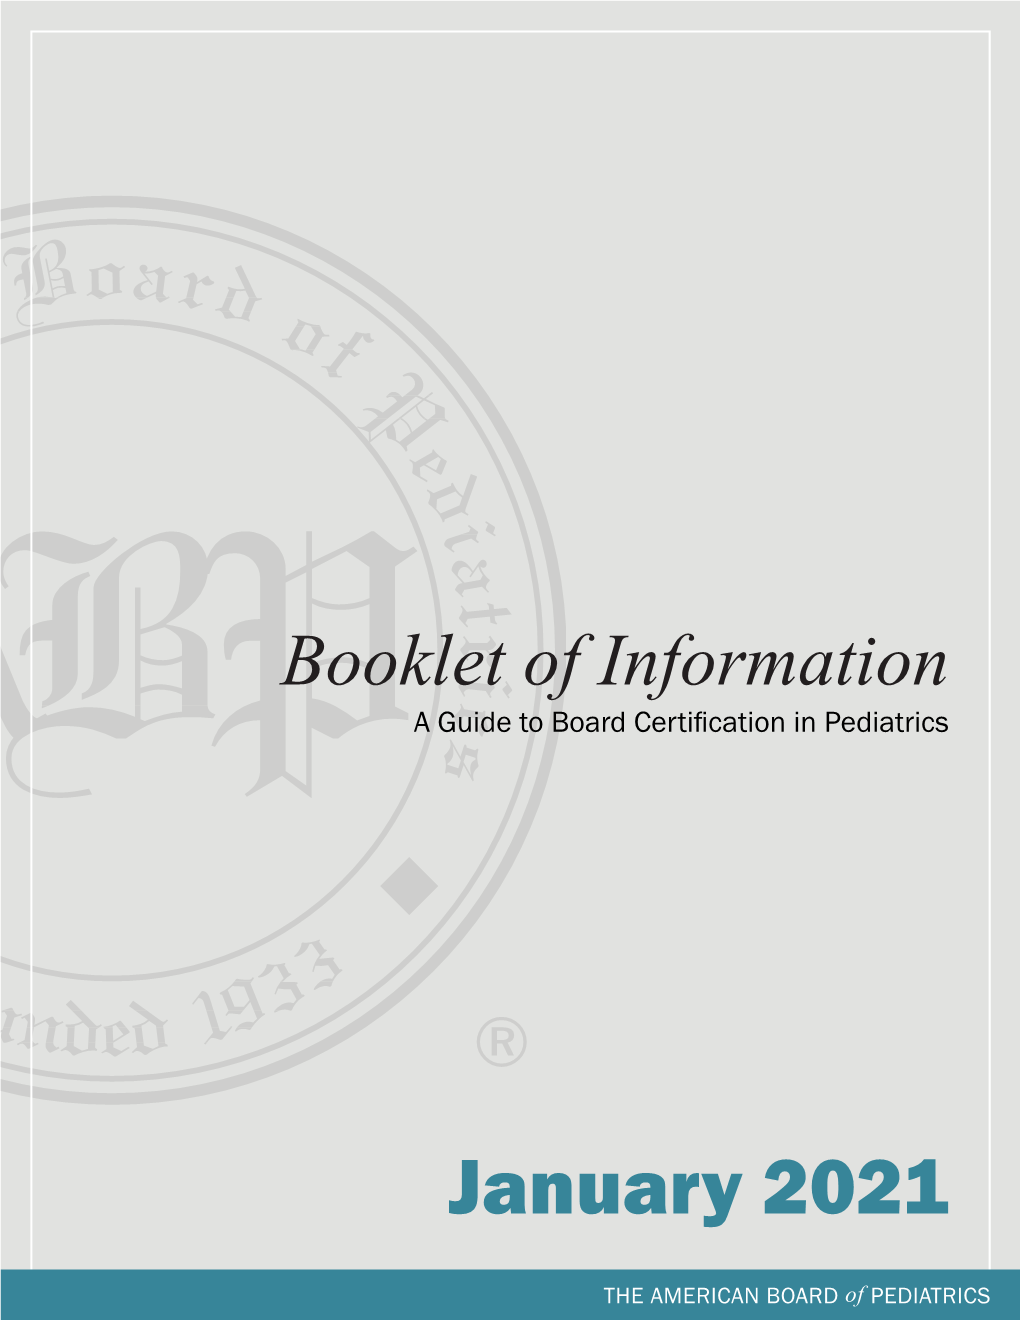 Booklet of Information a Guide to Board Certification in Pediatrics